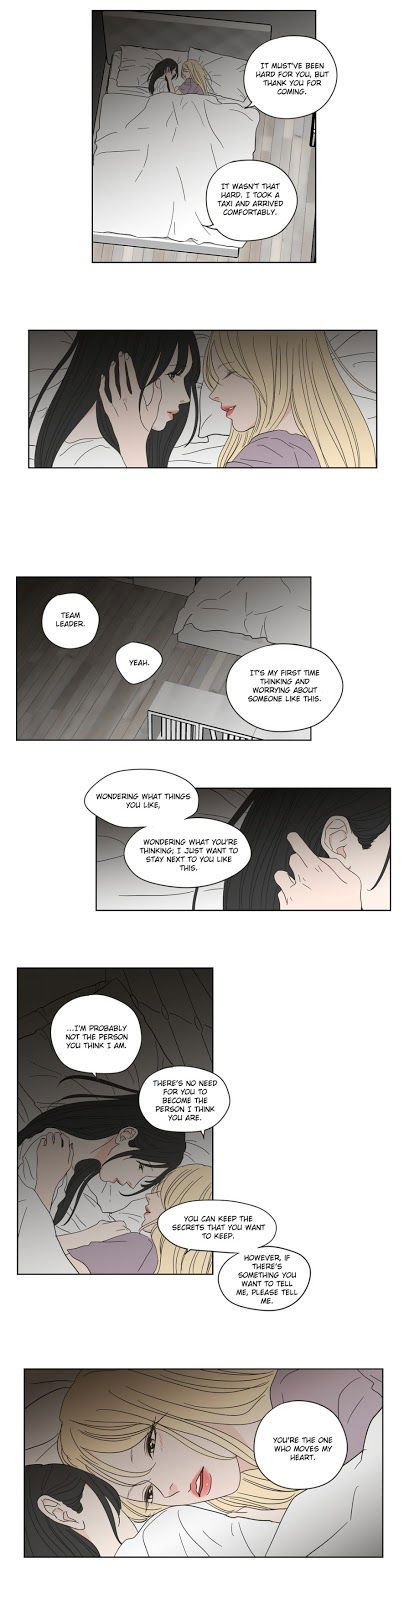 What Does The Fox Say? Chapter 051 page 12